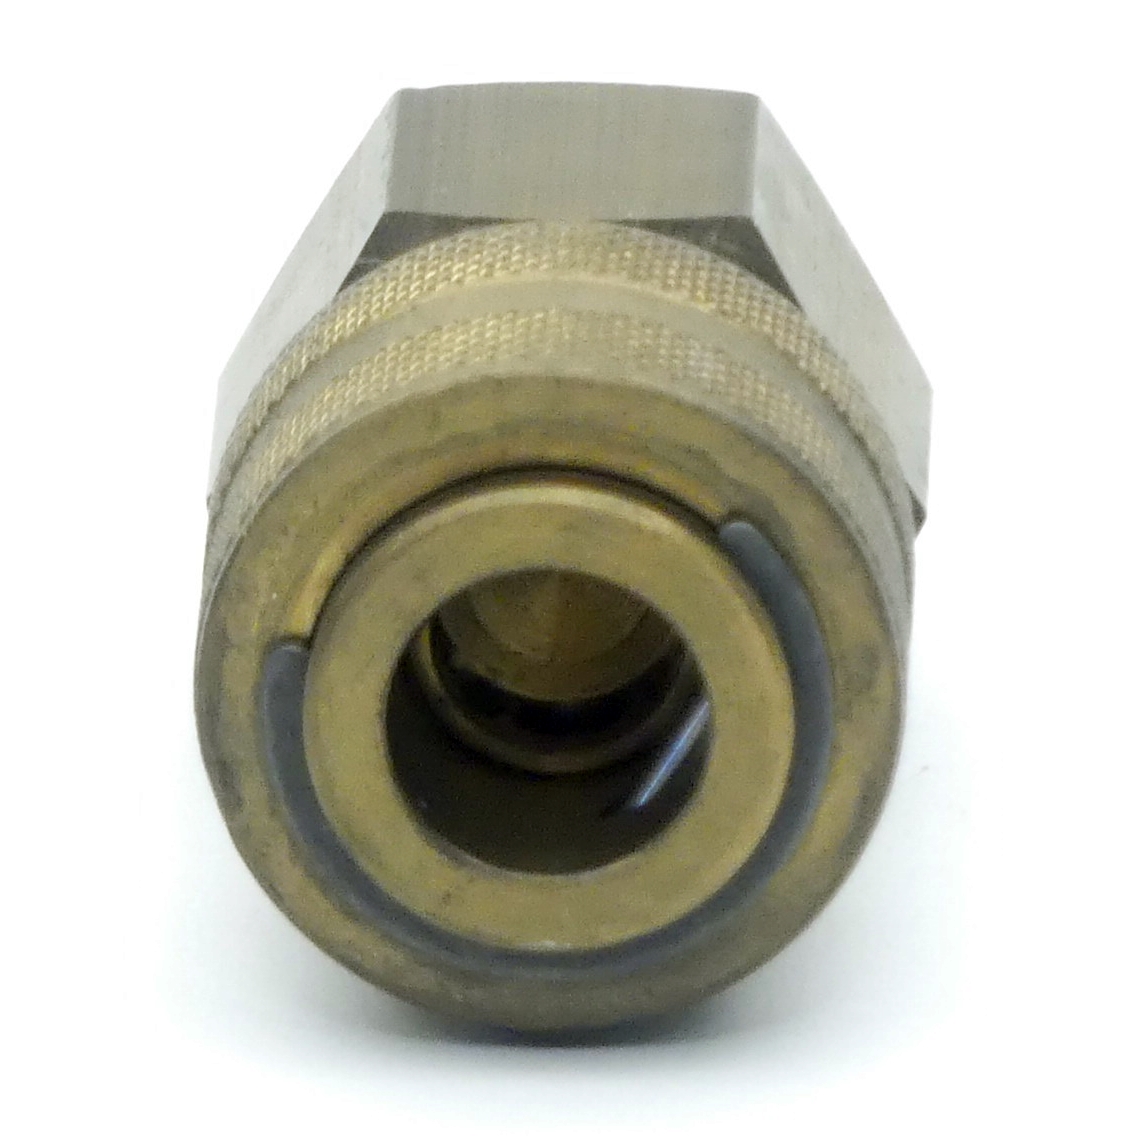 Locking coupling in the Pack of 25 